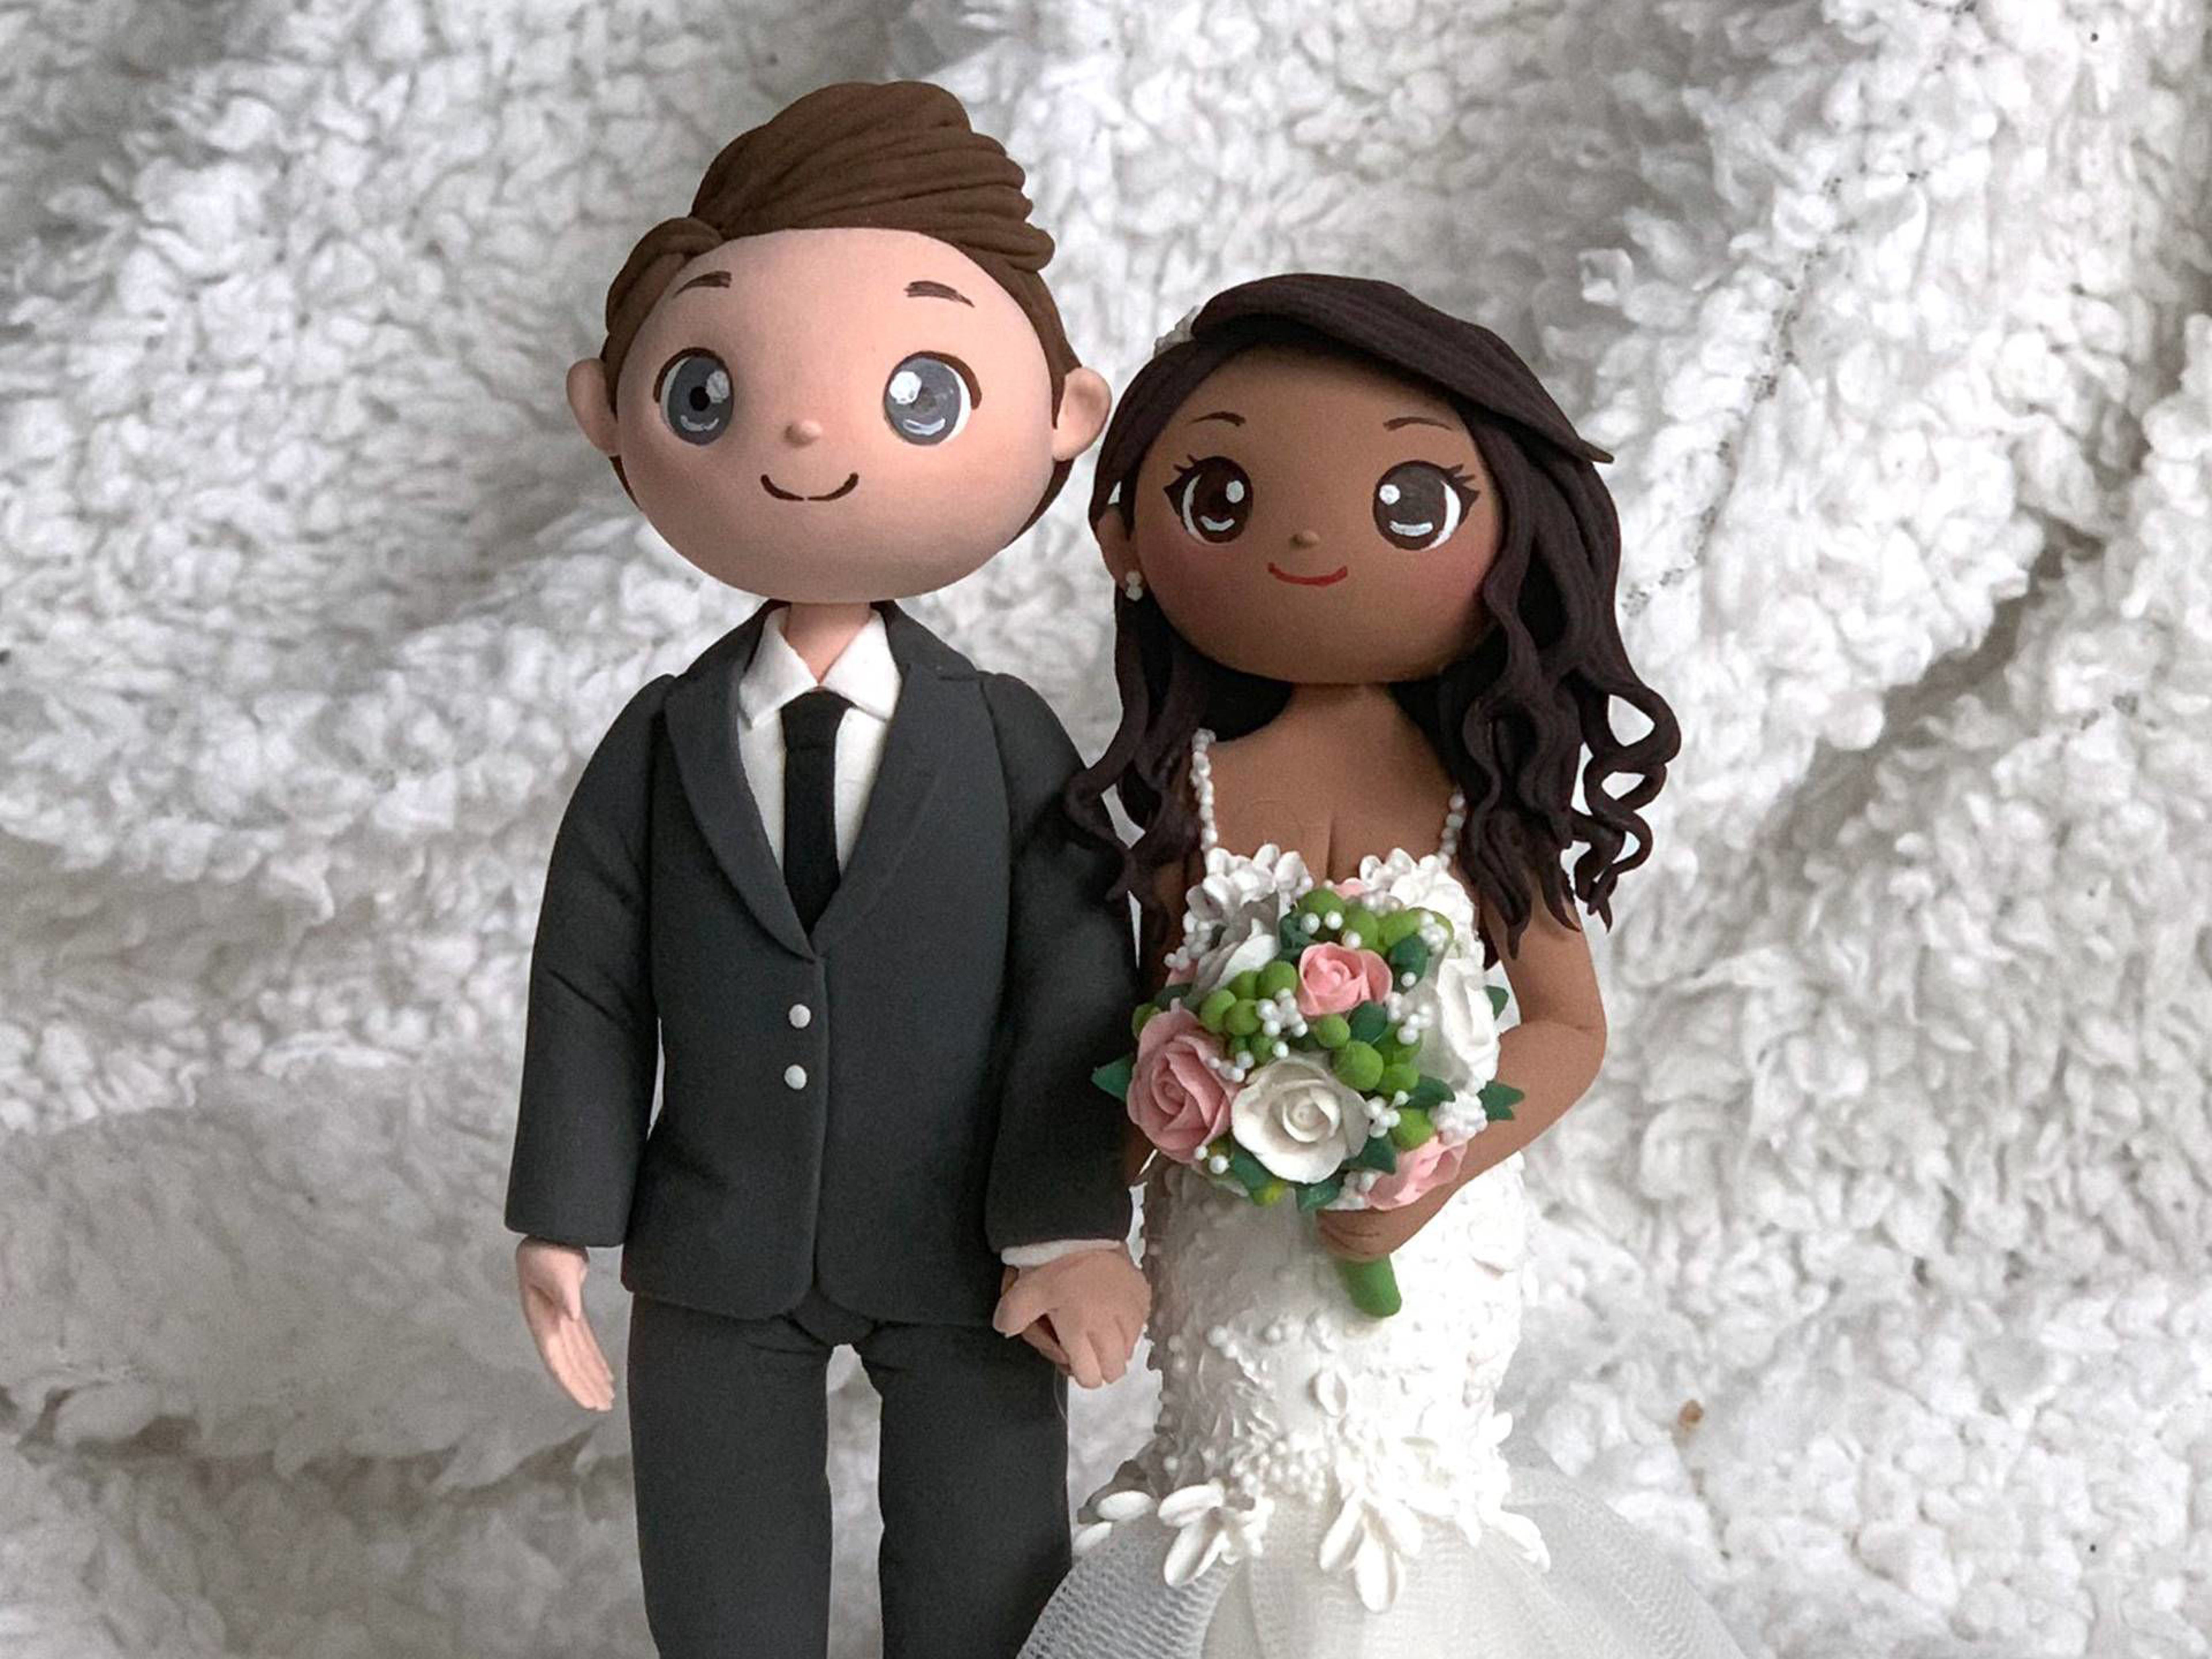 Picture of Mermaid Wedding Cake Topper, Nice wedding cake topper